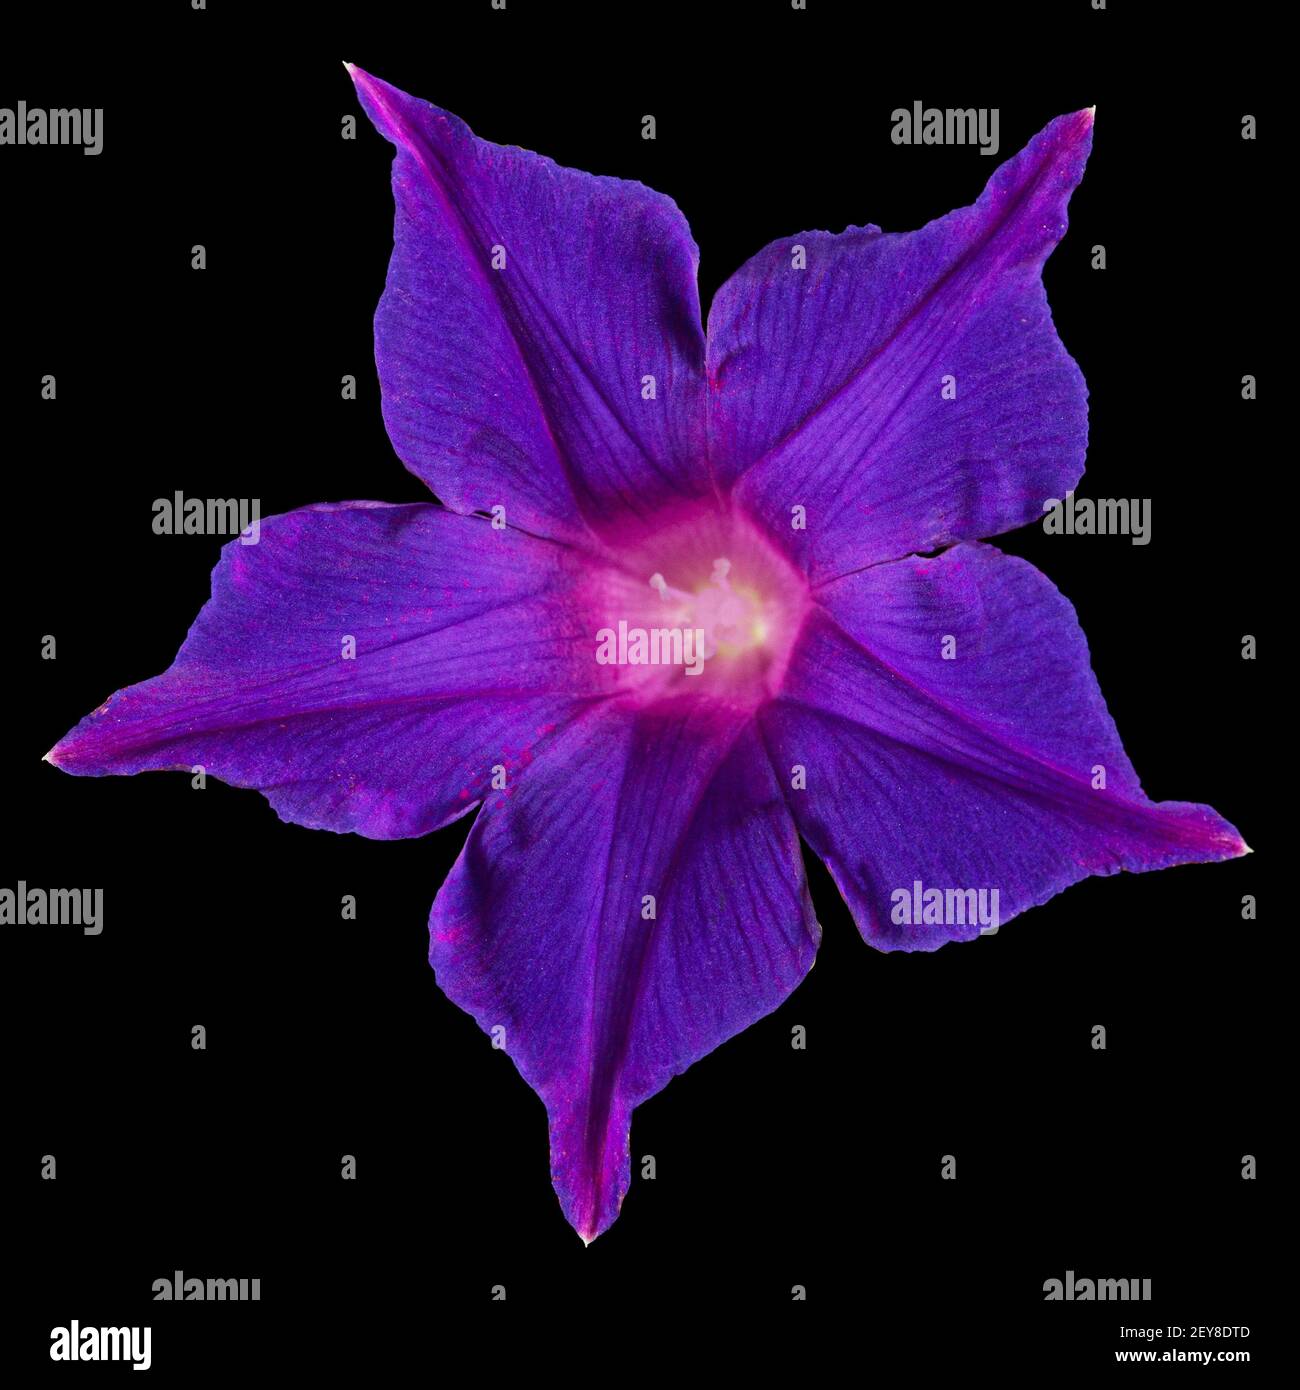 Violet flower of ipomoea, Japanese morning glory, convolvulus, isolated on black background Stock Photo